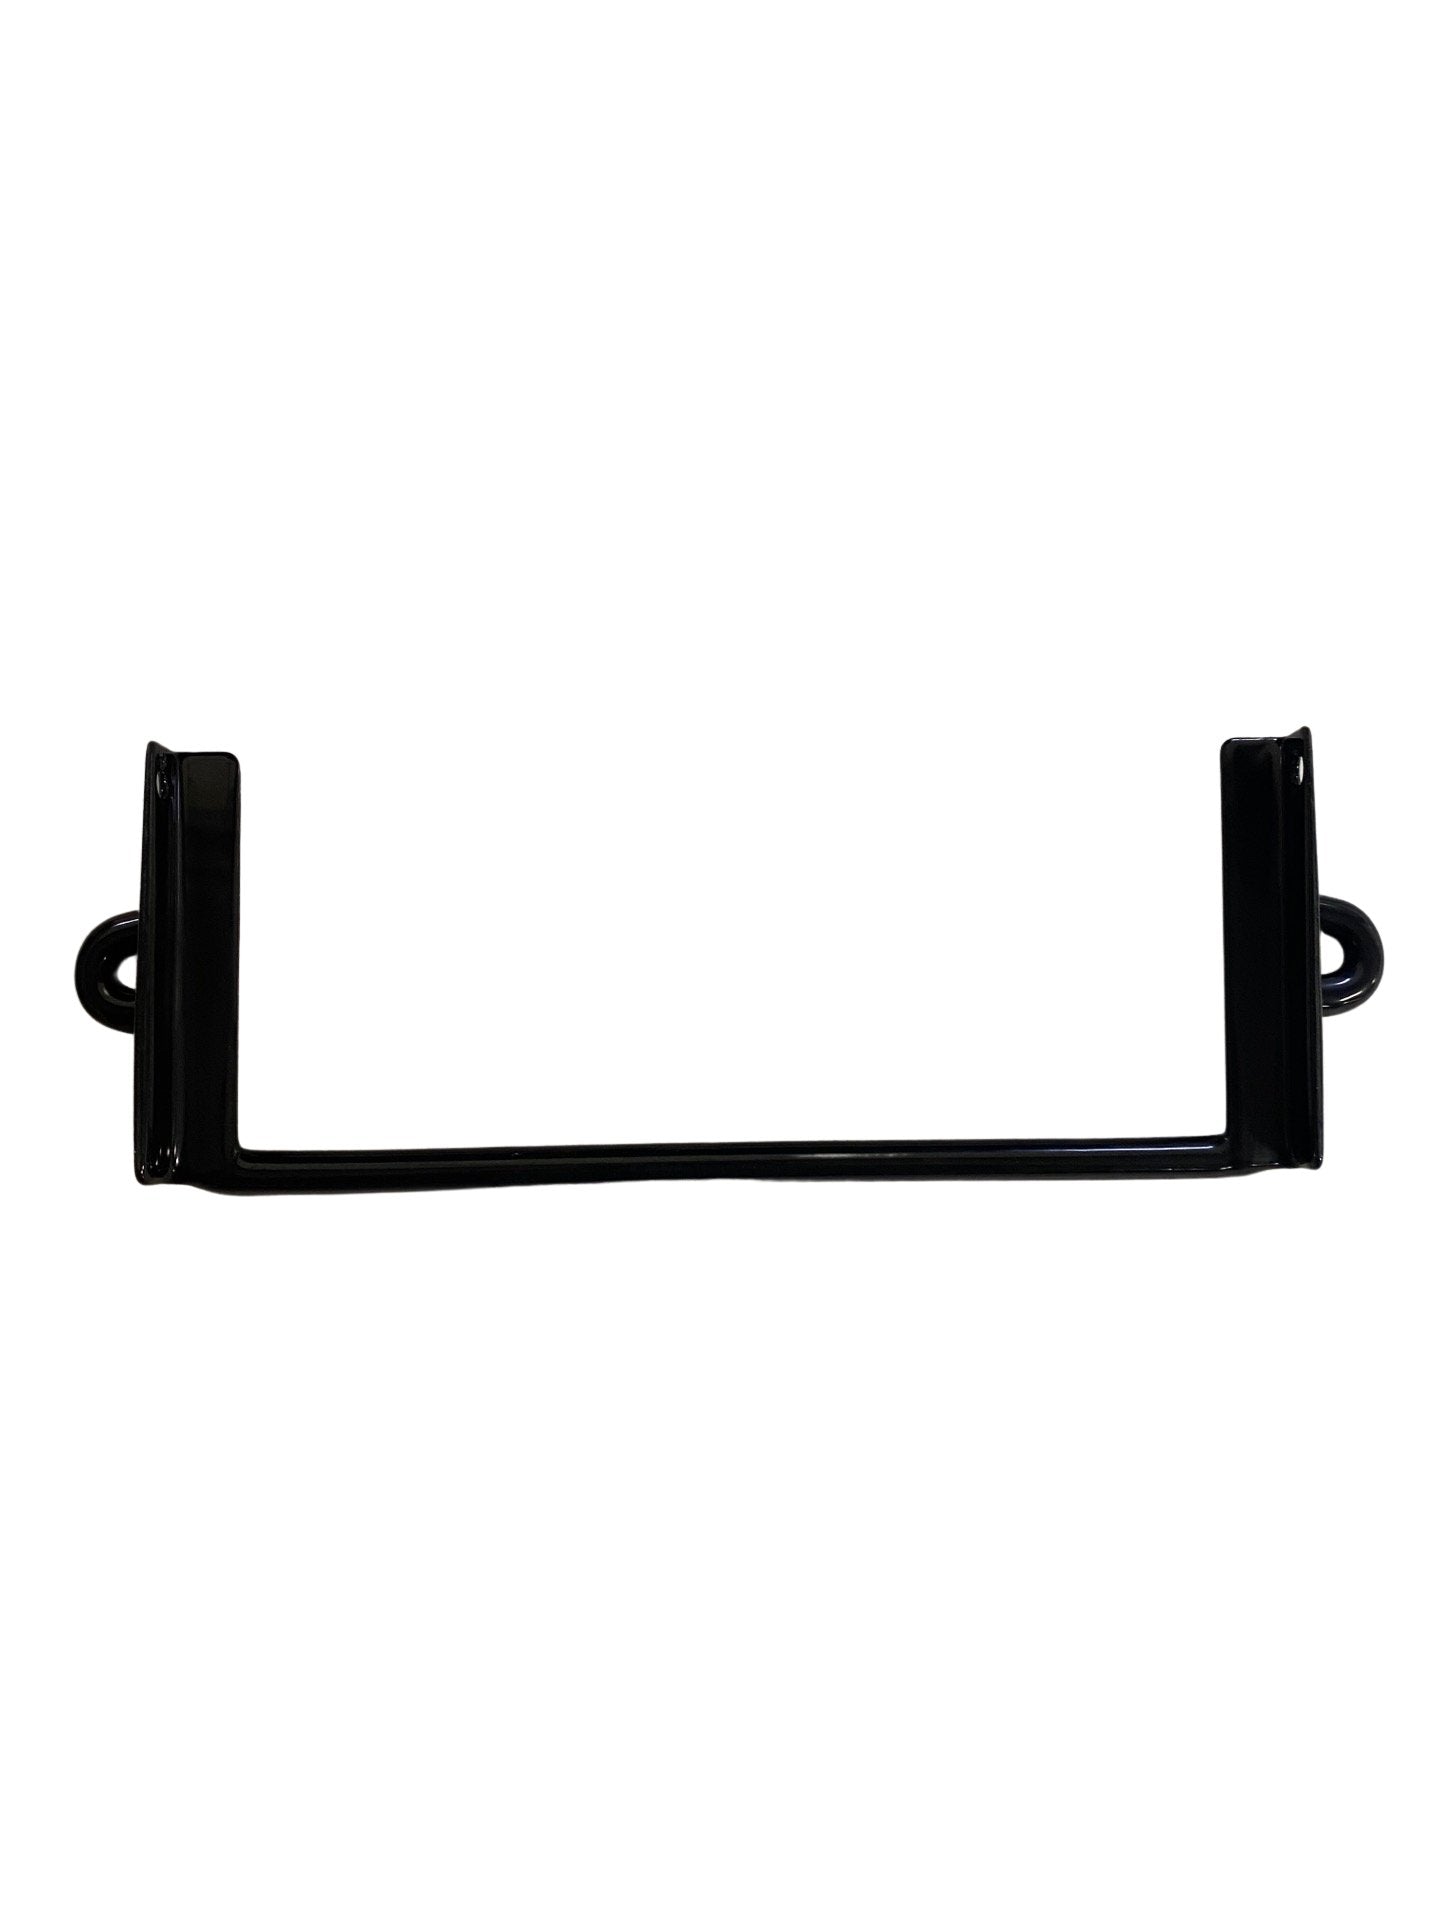 Battery Hold Down Bracket, 1953-1971, Willys and Jeep - The JeepsterMan